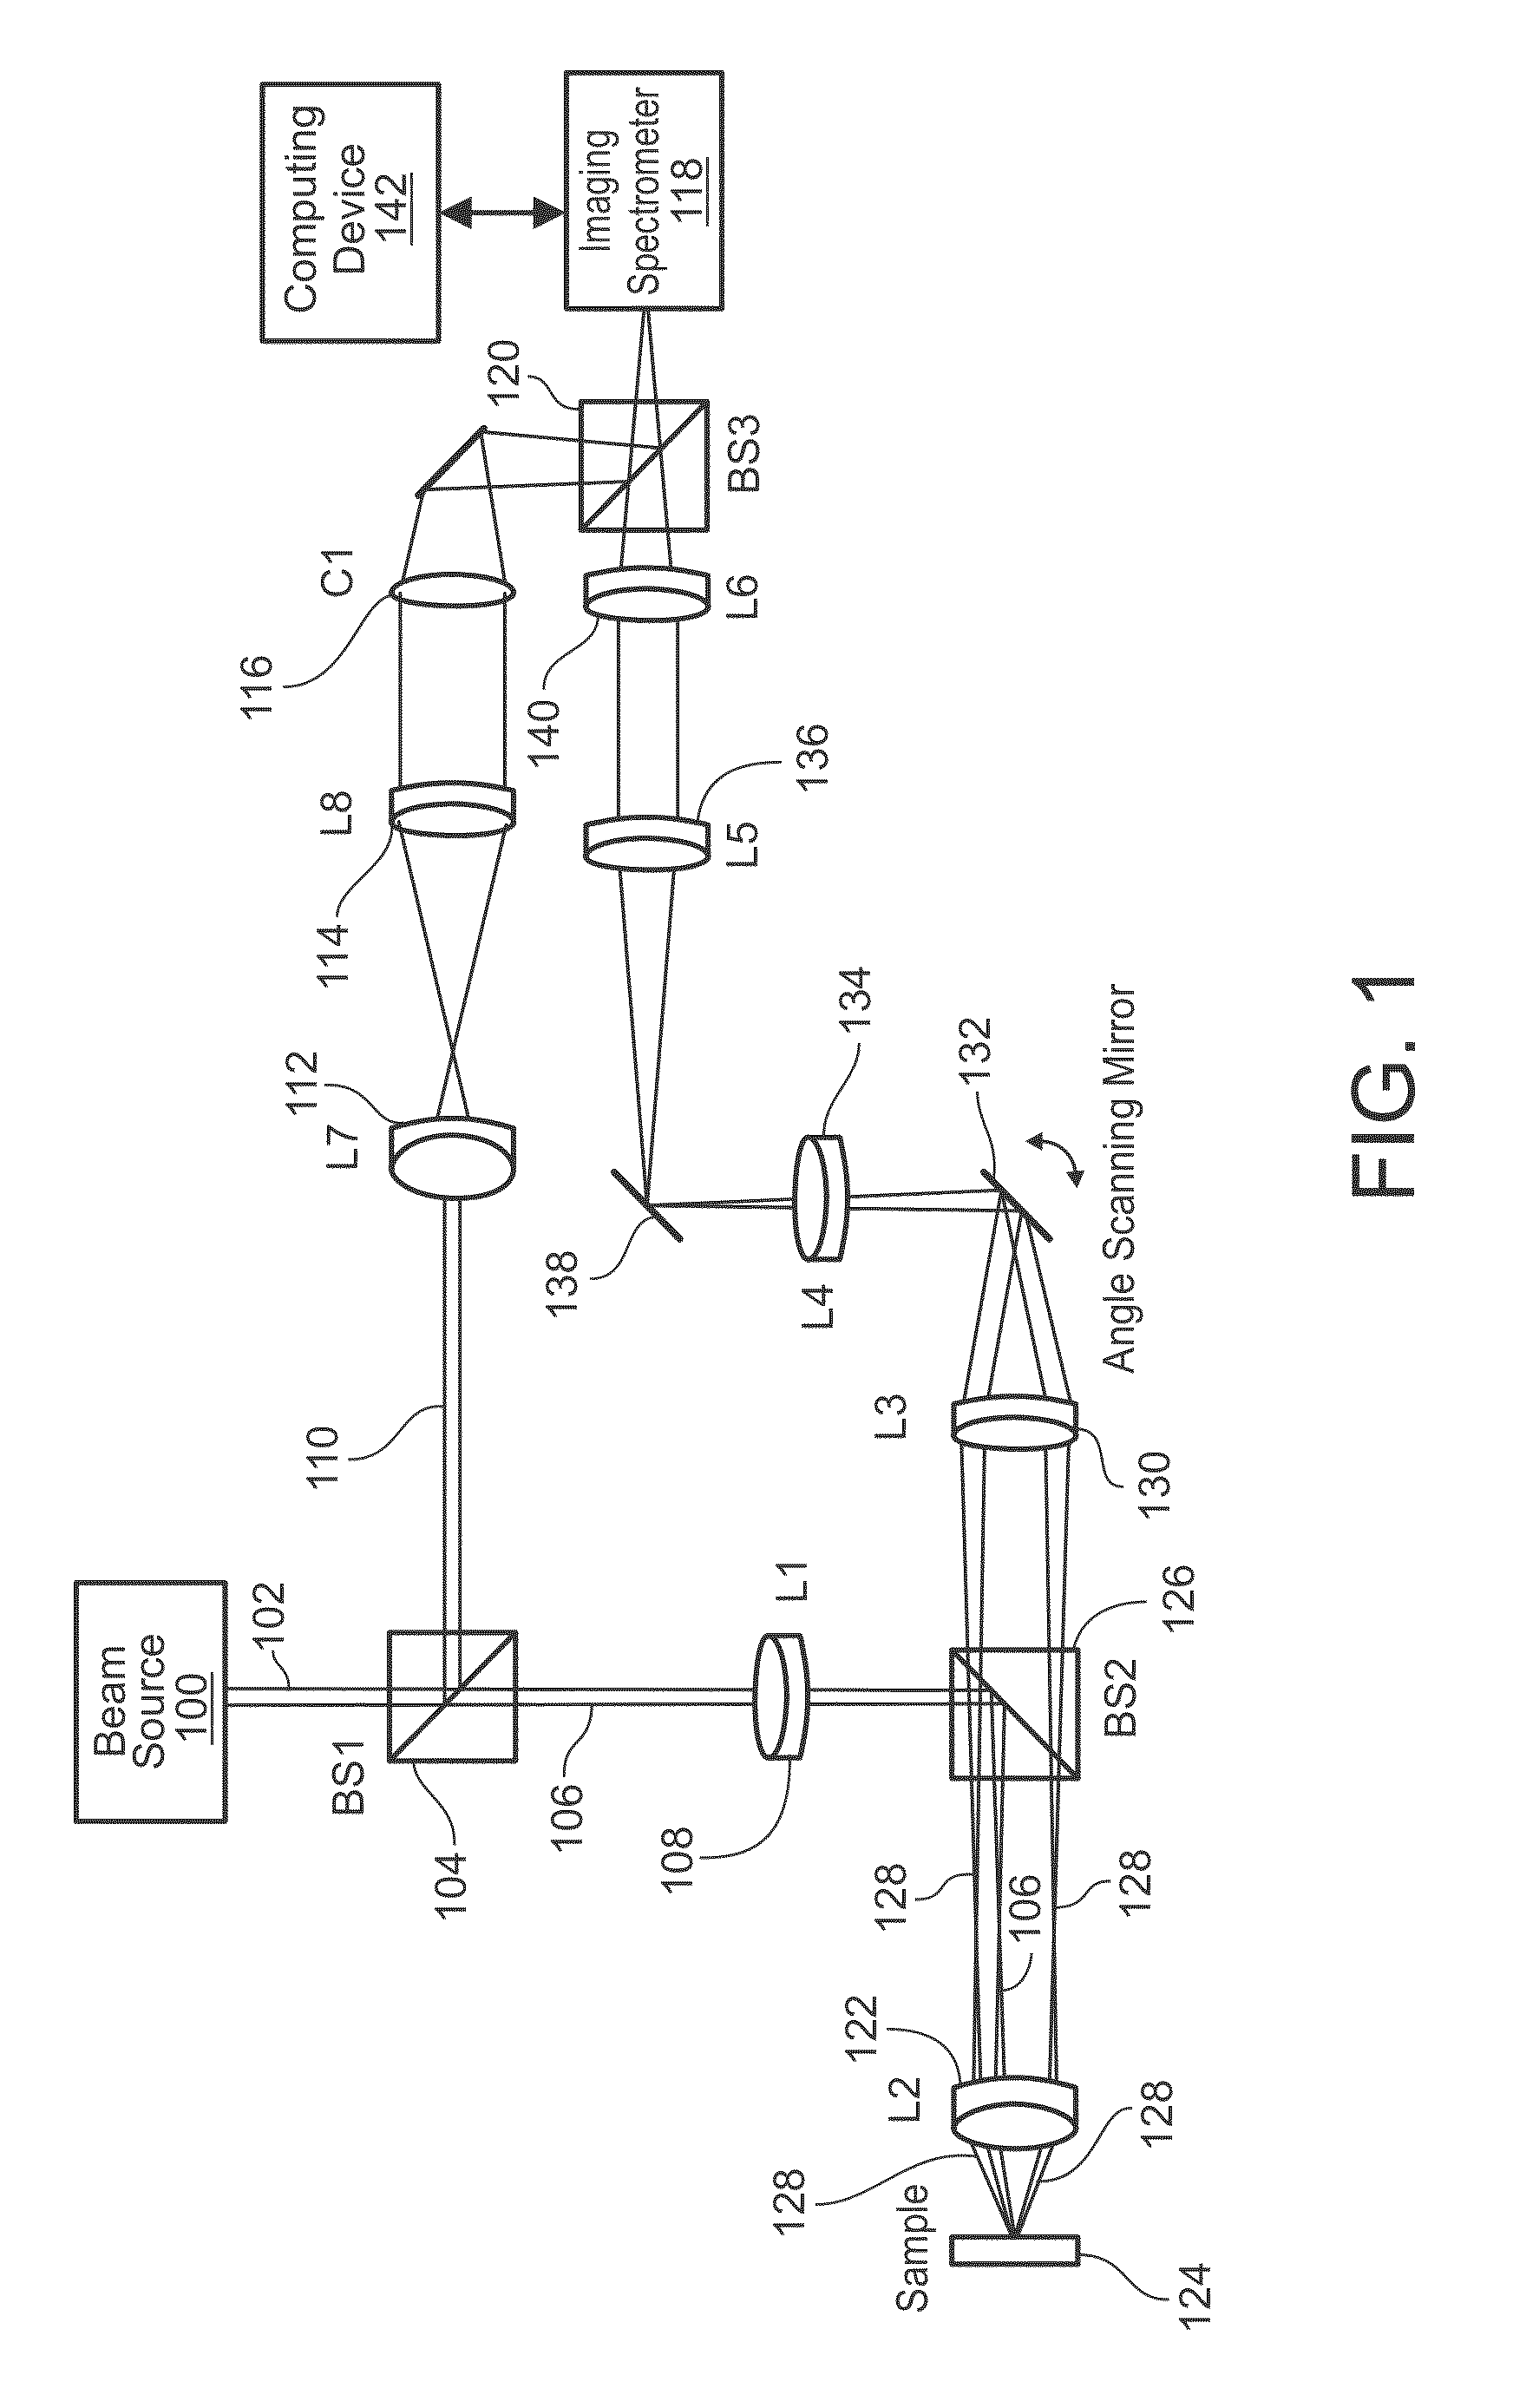 Systems and methods of angle-resolved low coherence interferometry based optical correlation